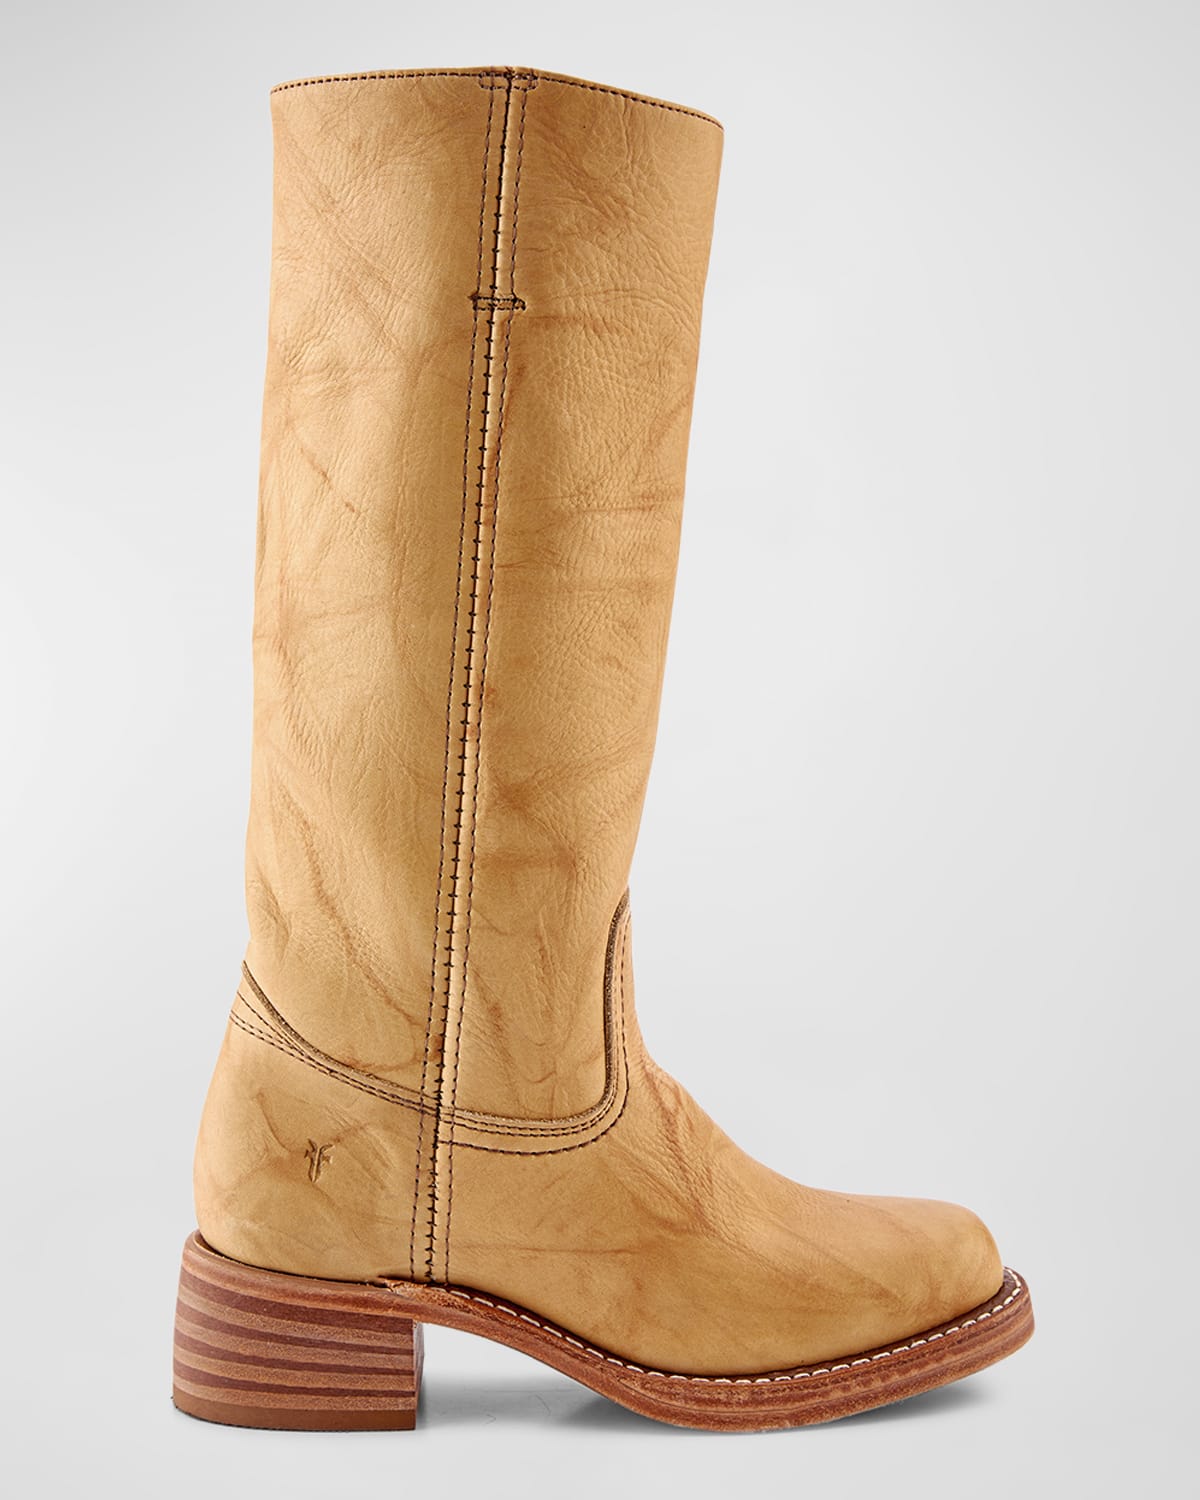 FRYE CAMPUS TALL LEATHER RIDING BOOTS